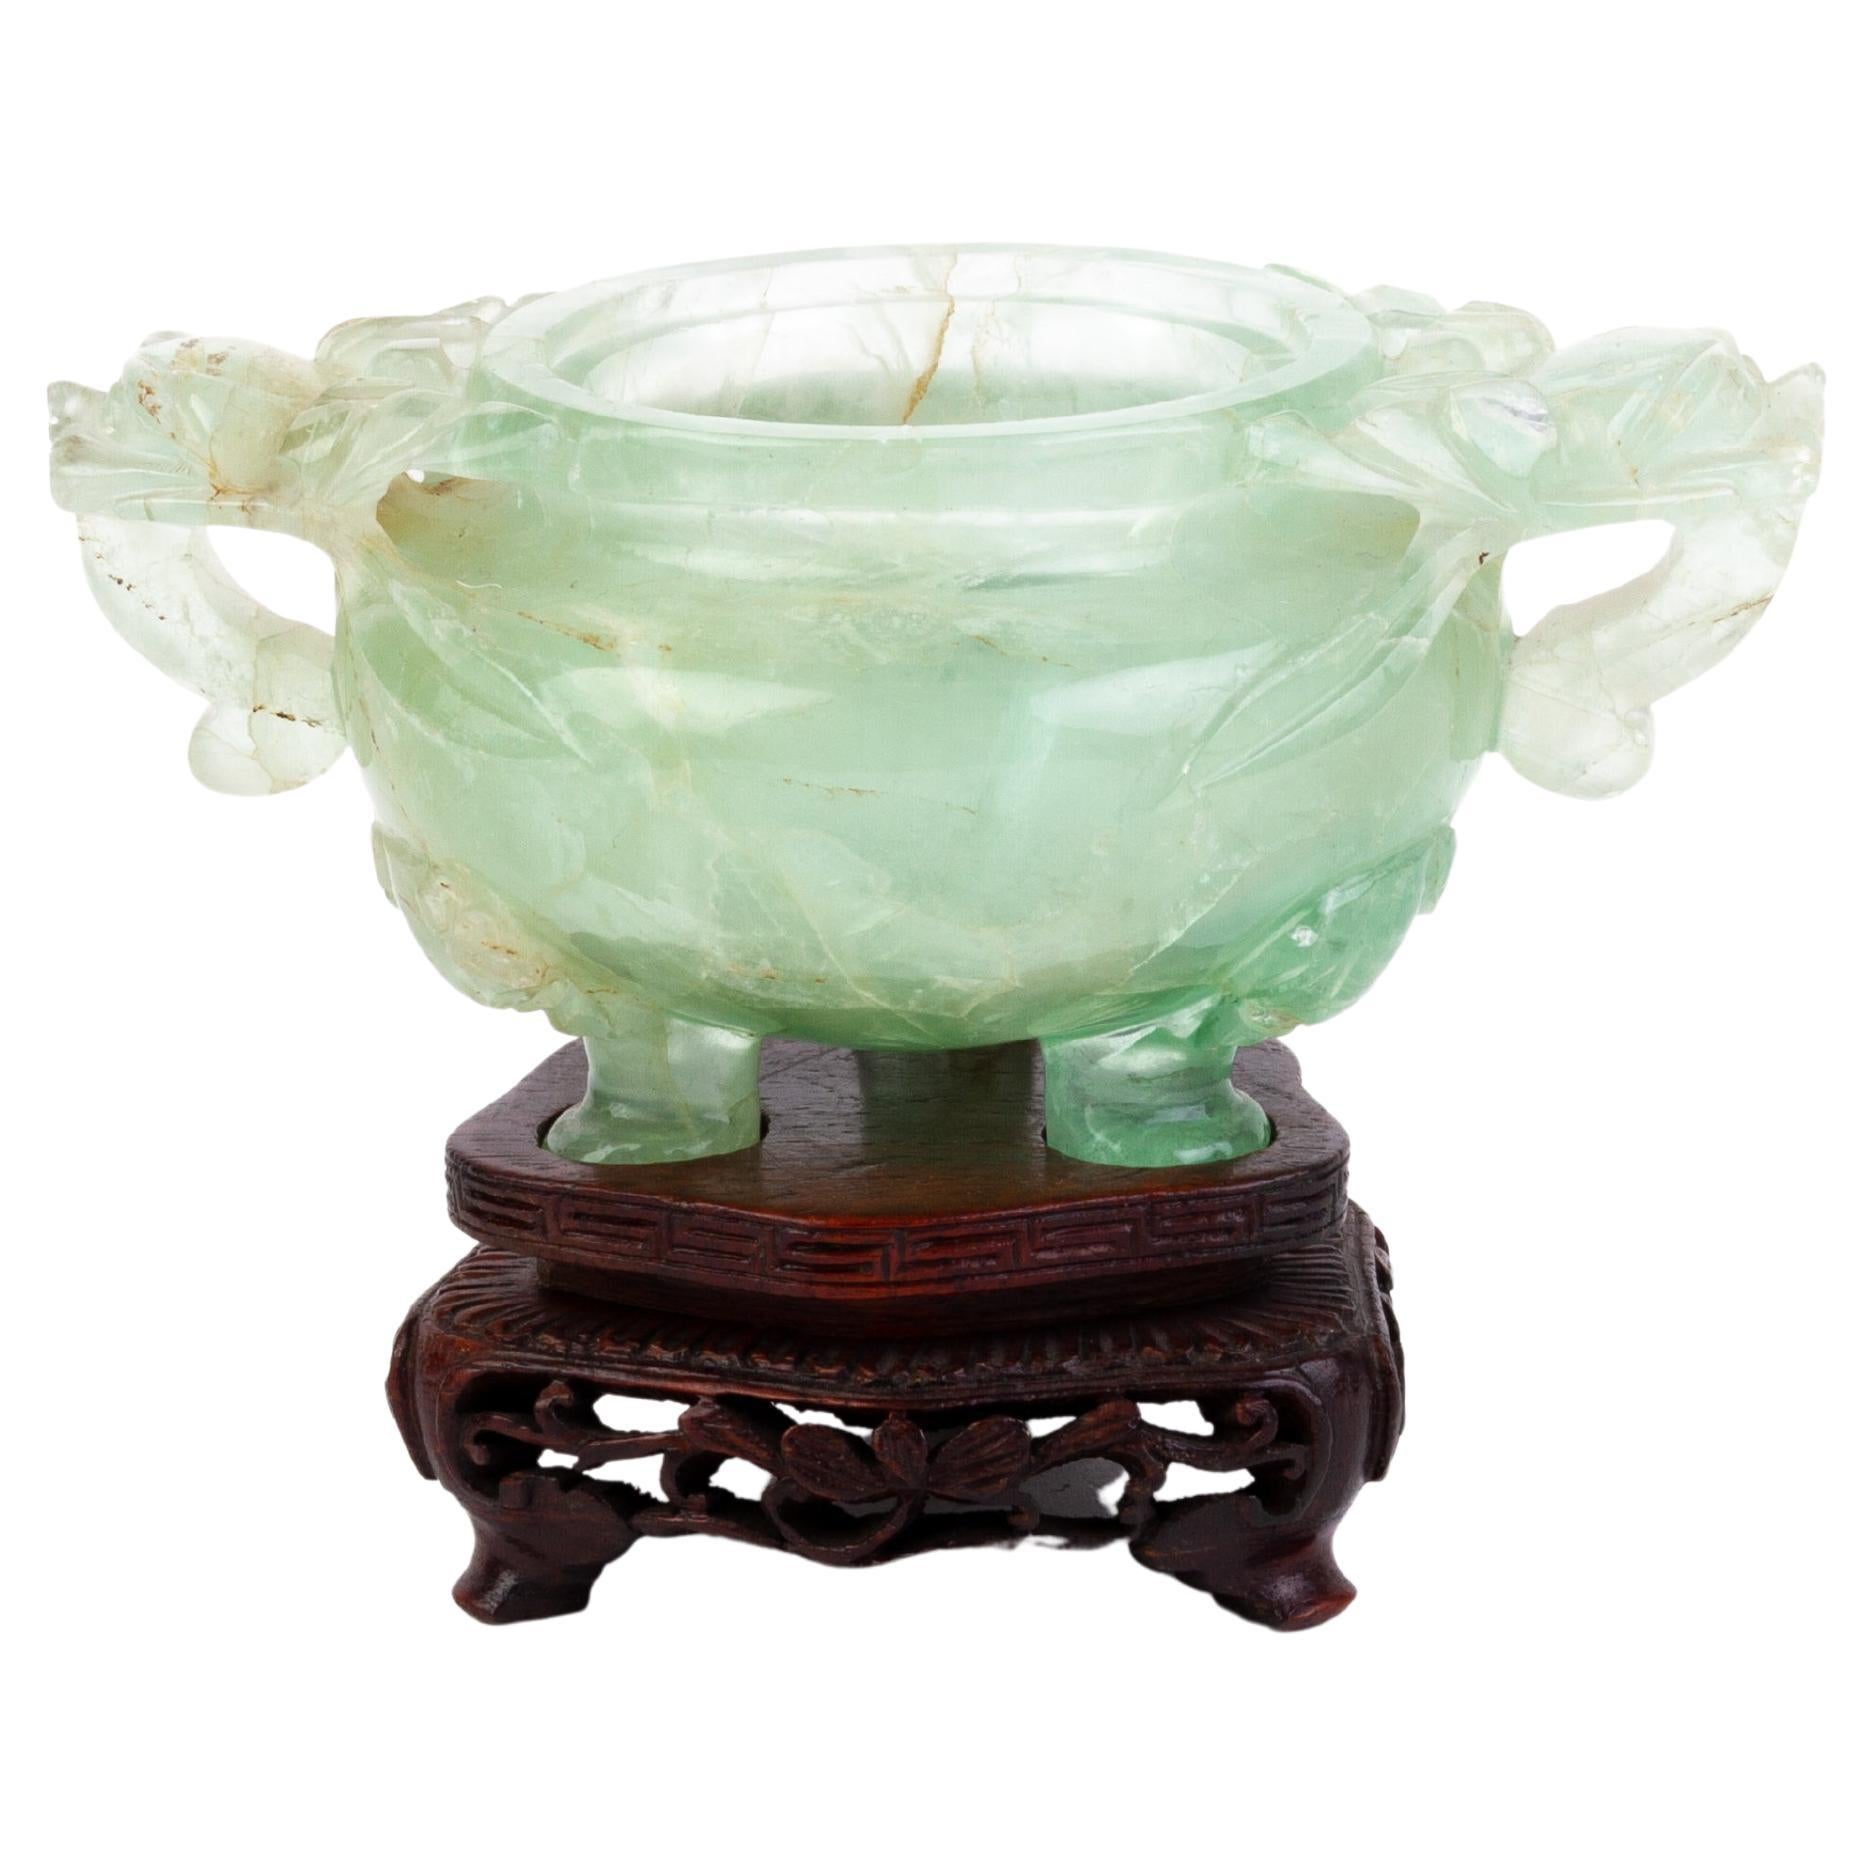 Chinese Qing Dynasty Lidded Jade Censer Vase Sculpture on Stand 19th Century  For Sale